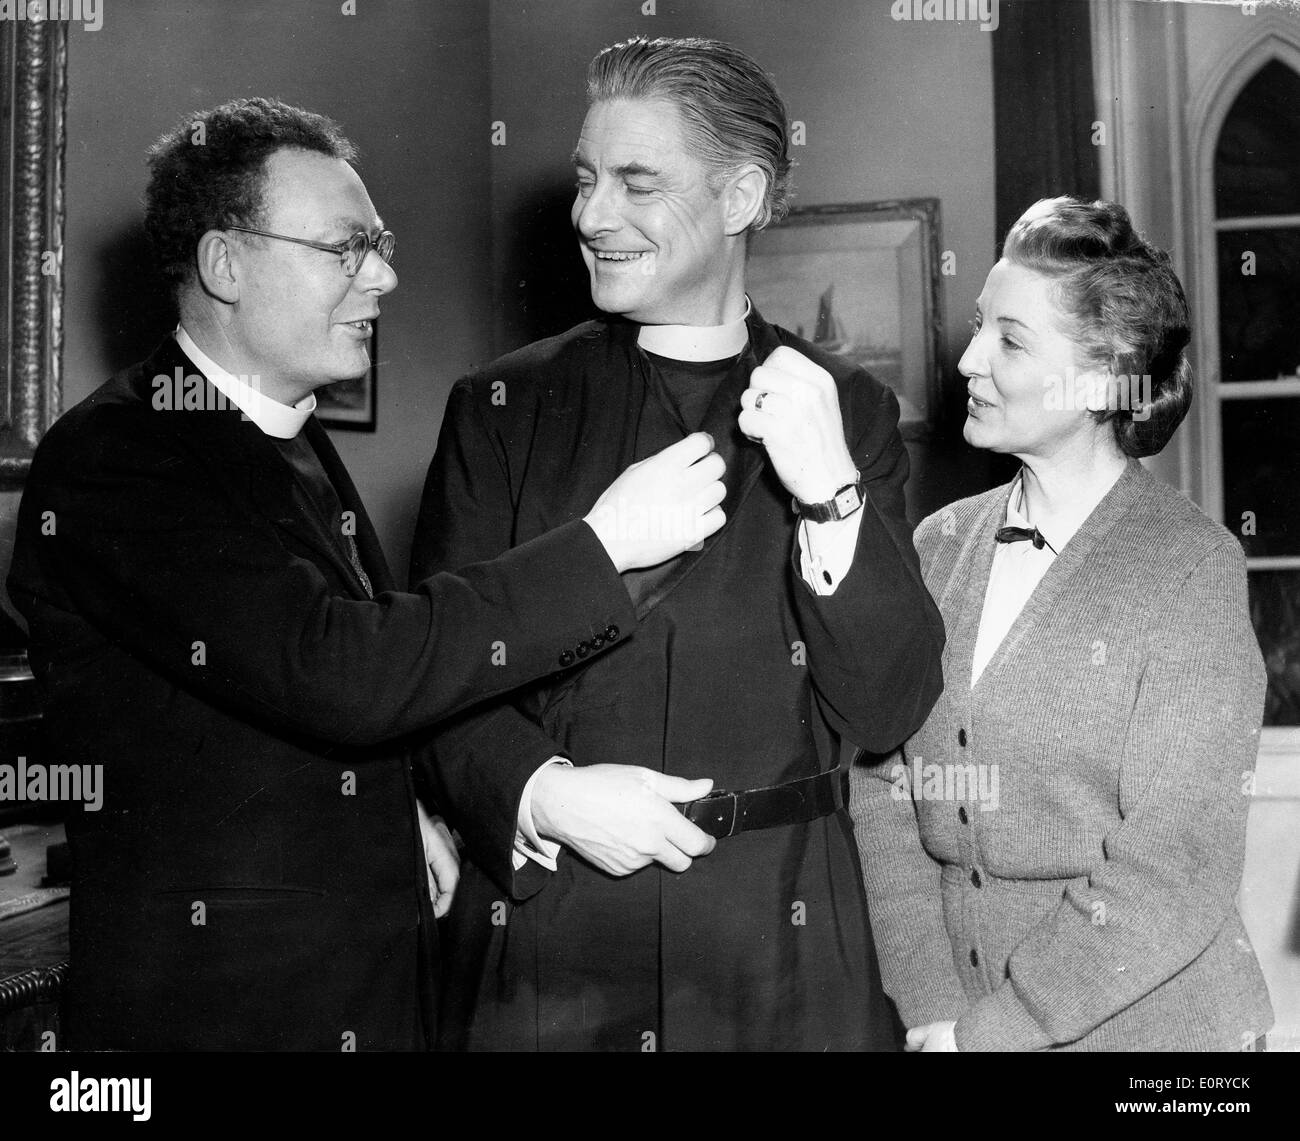 ROBERT DONAT, center, dressed as the Rev. William Thorne in the 1954 film 'Lease of Life', speaking to cast members on set. Stock Photo